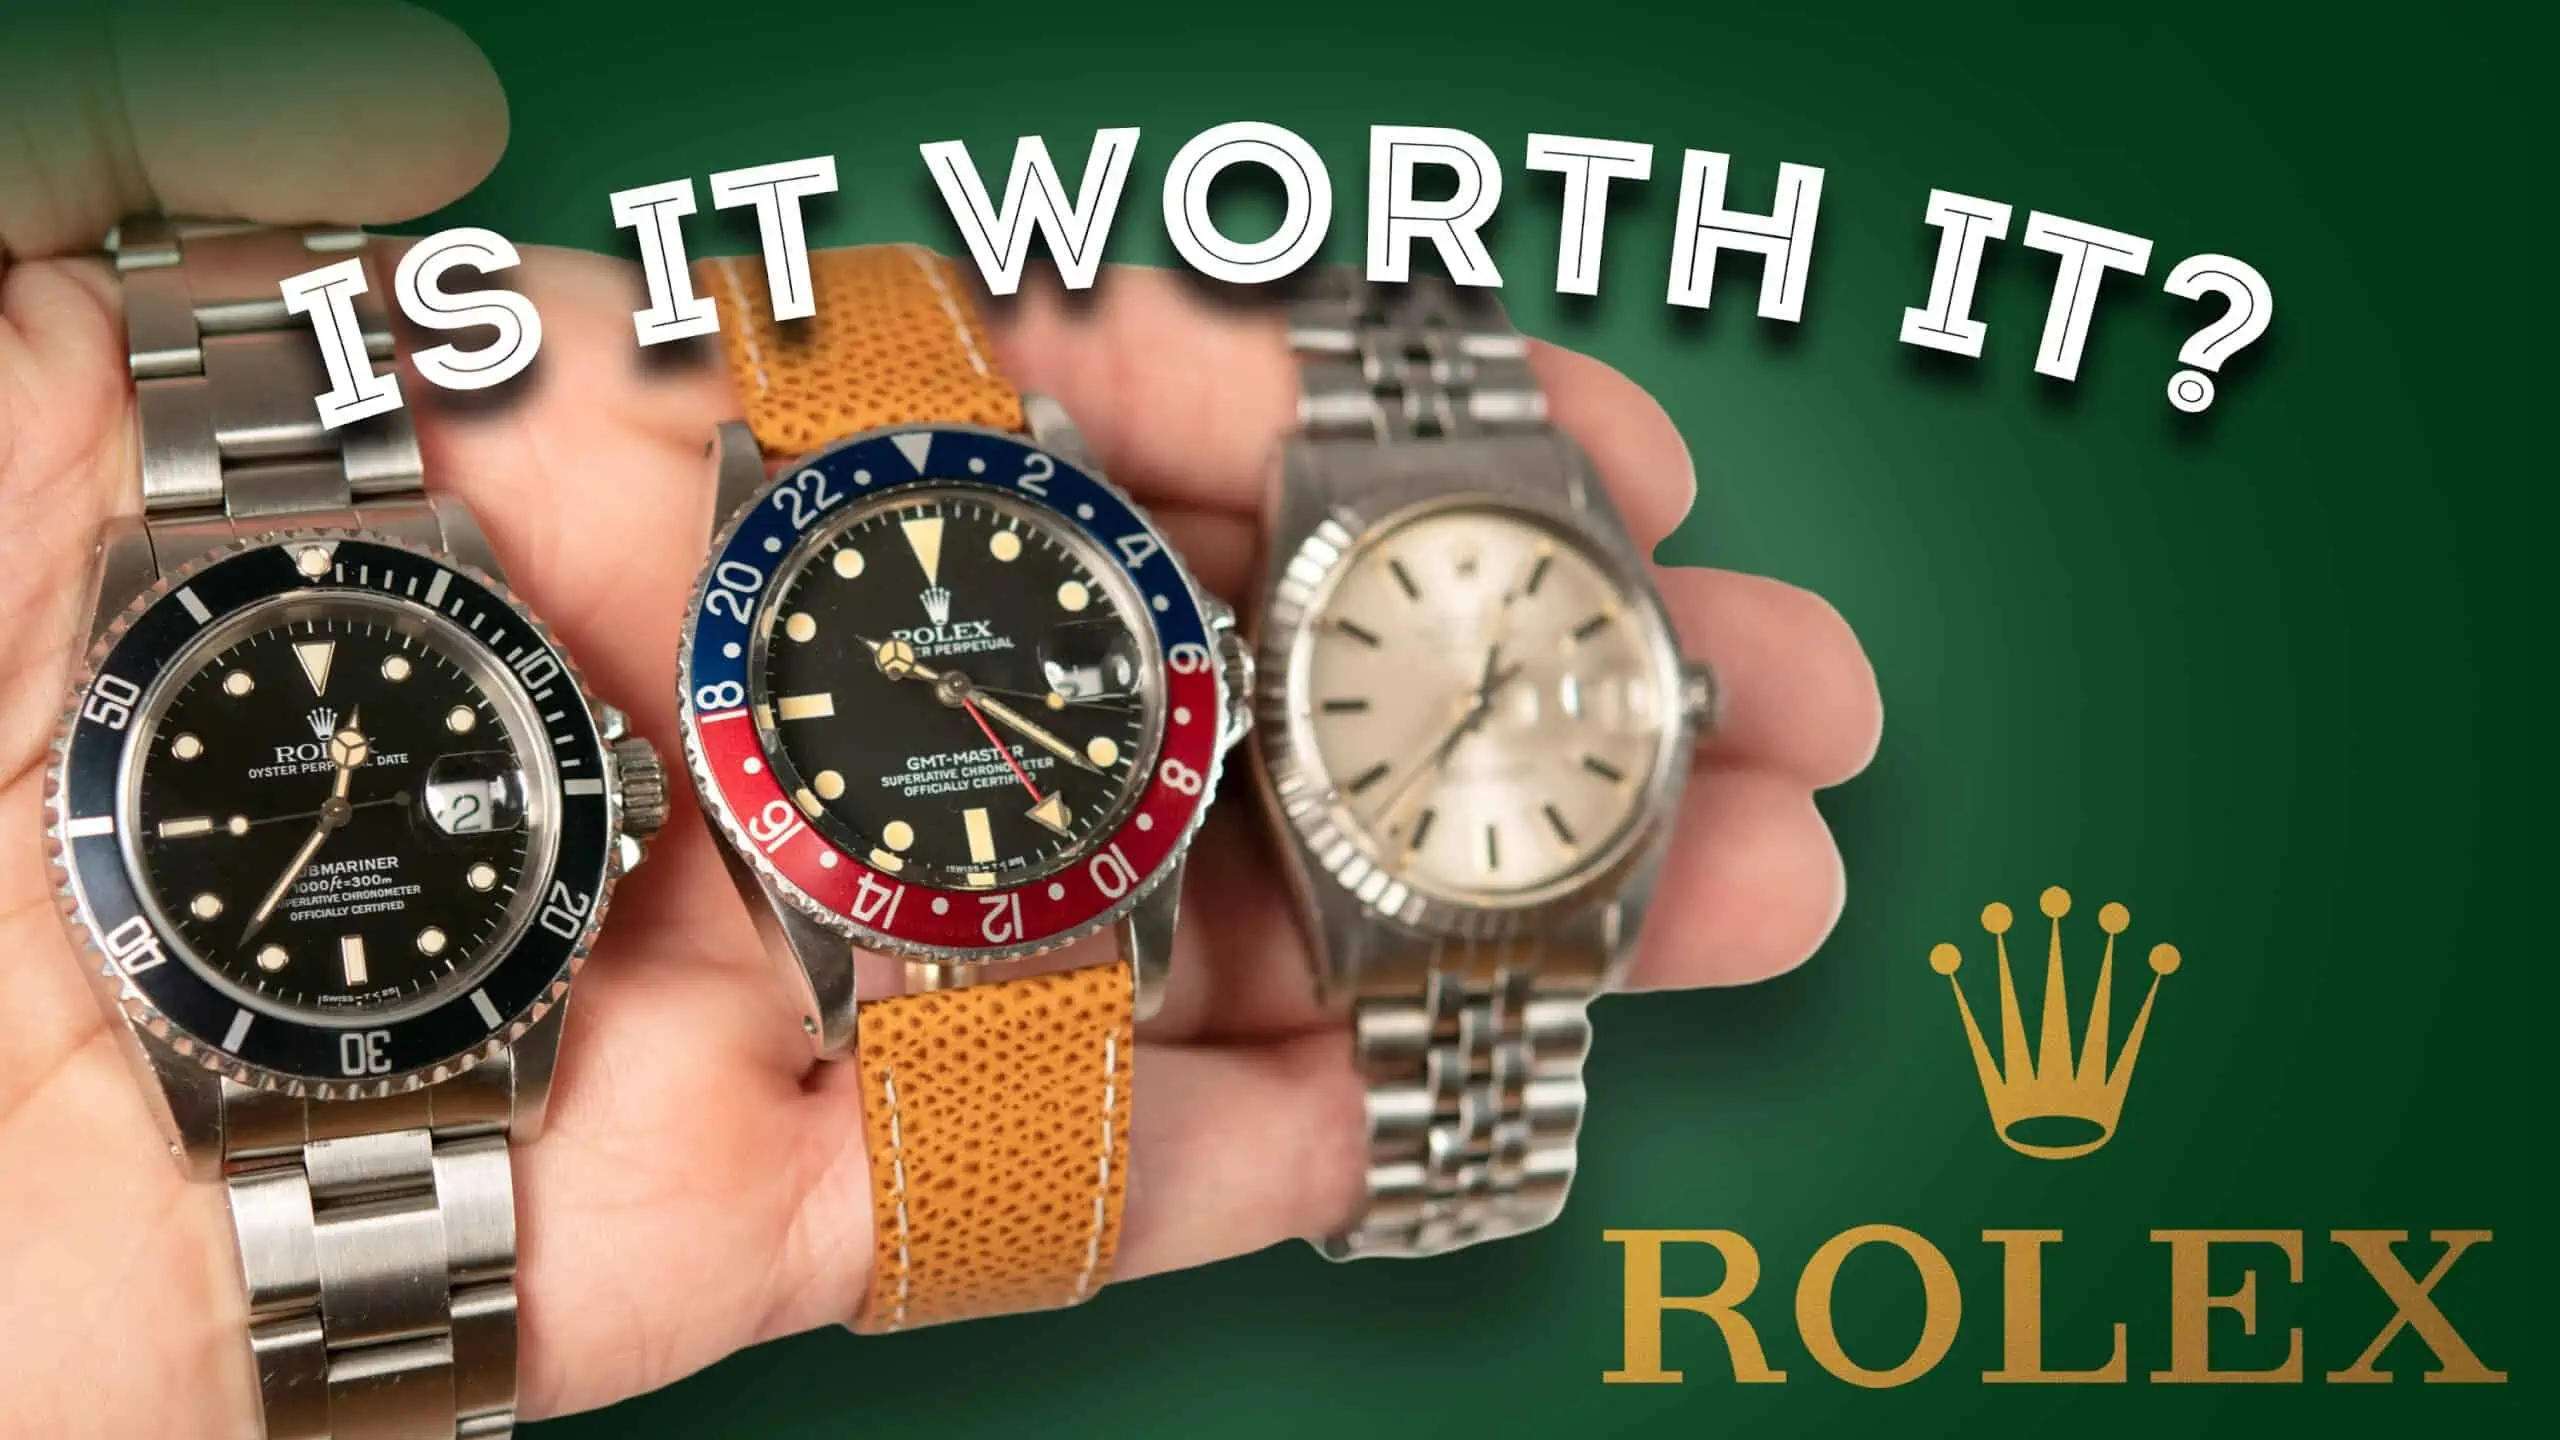 Rolex Are They Worth It? Men's Watch Review - Datejust, Submariner, GMT Master